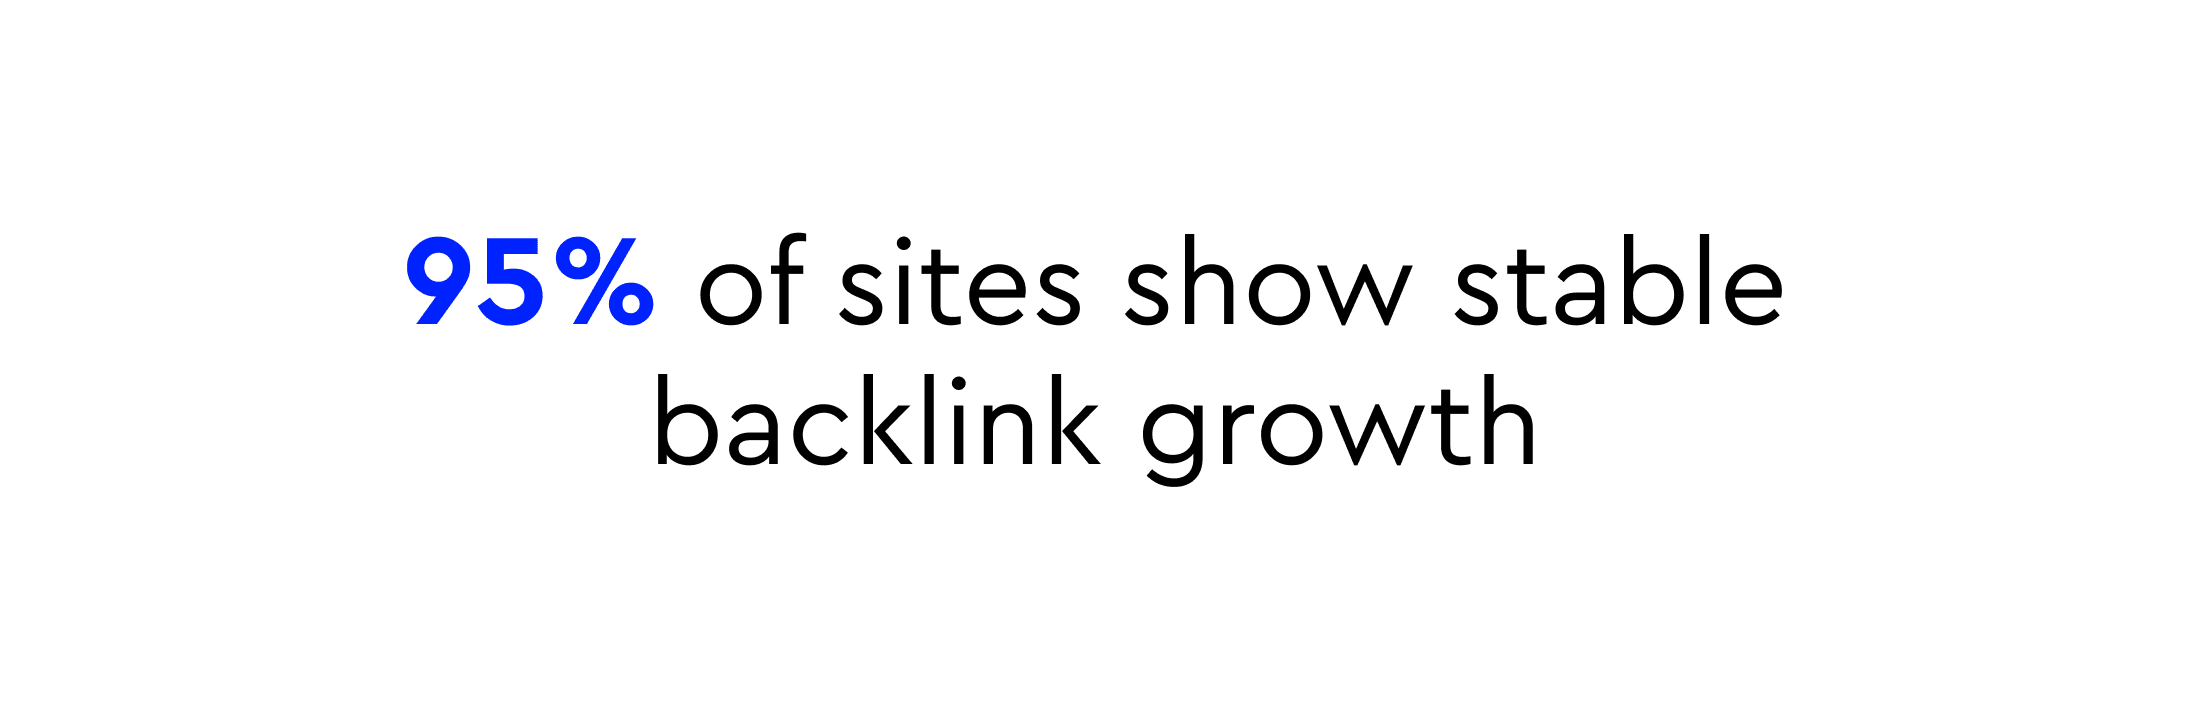 Top Backlink growth of top Spanish ecommerce sites